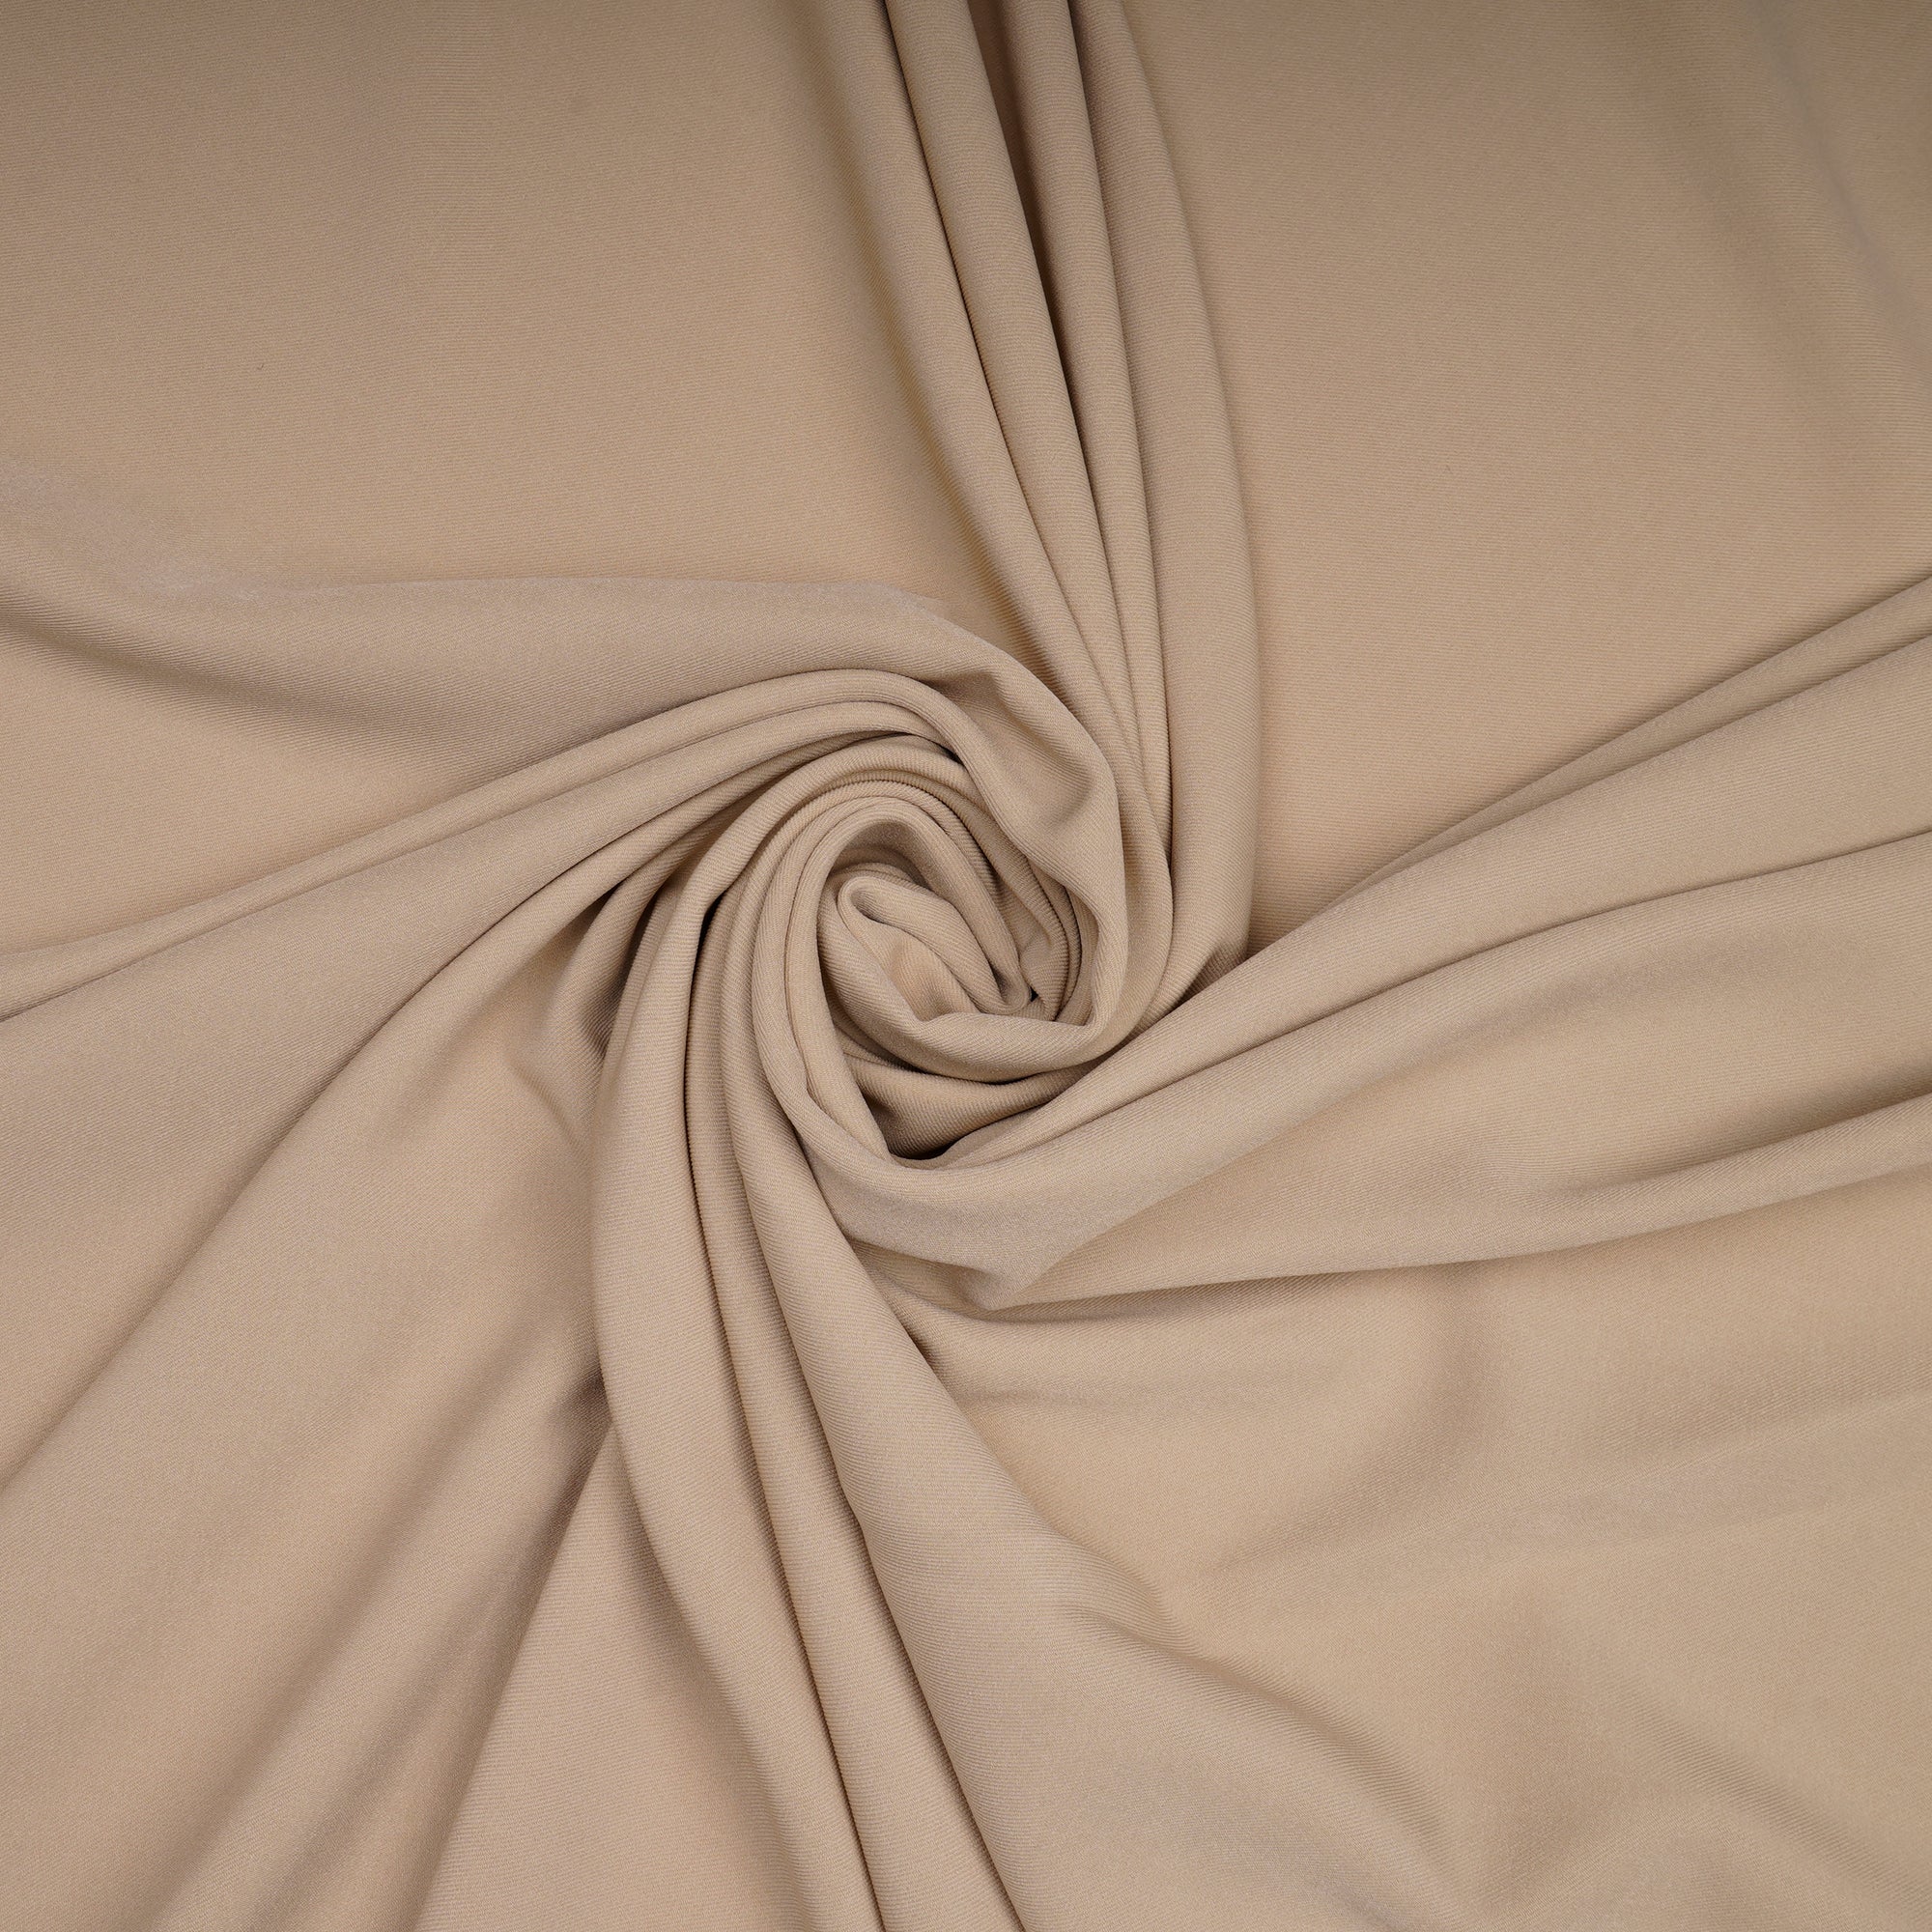 White Pepper Solid Dyed Imported British Twill Fabric (60" Width)